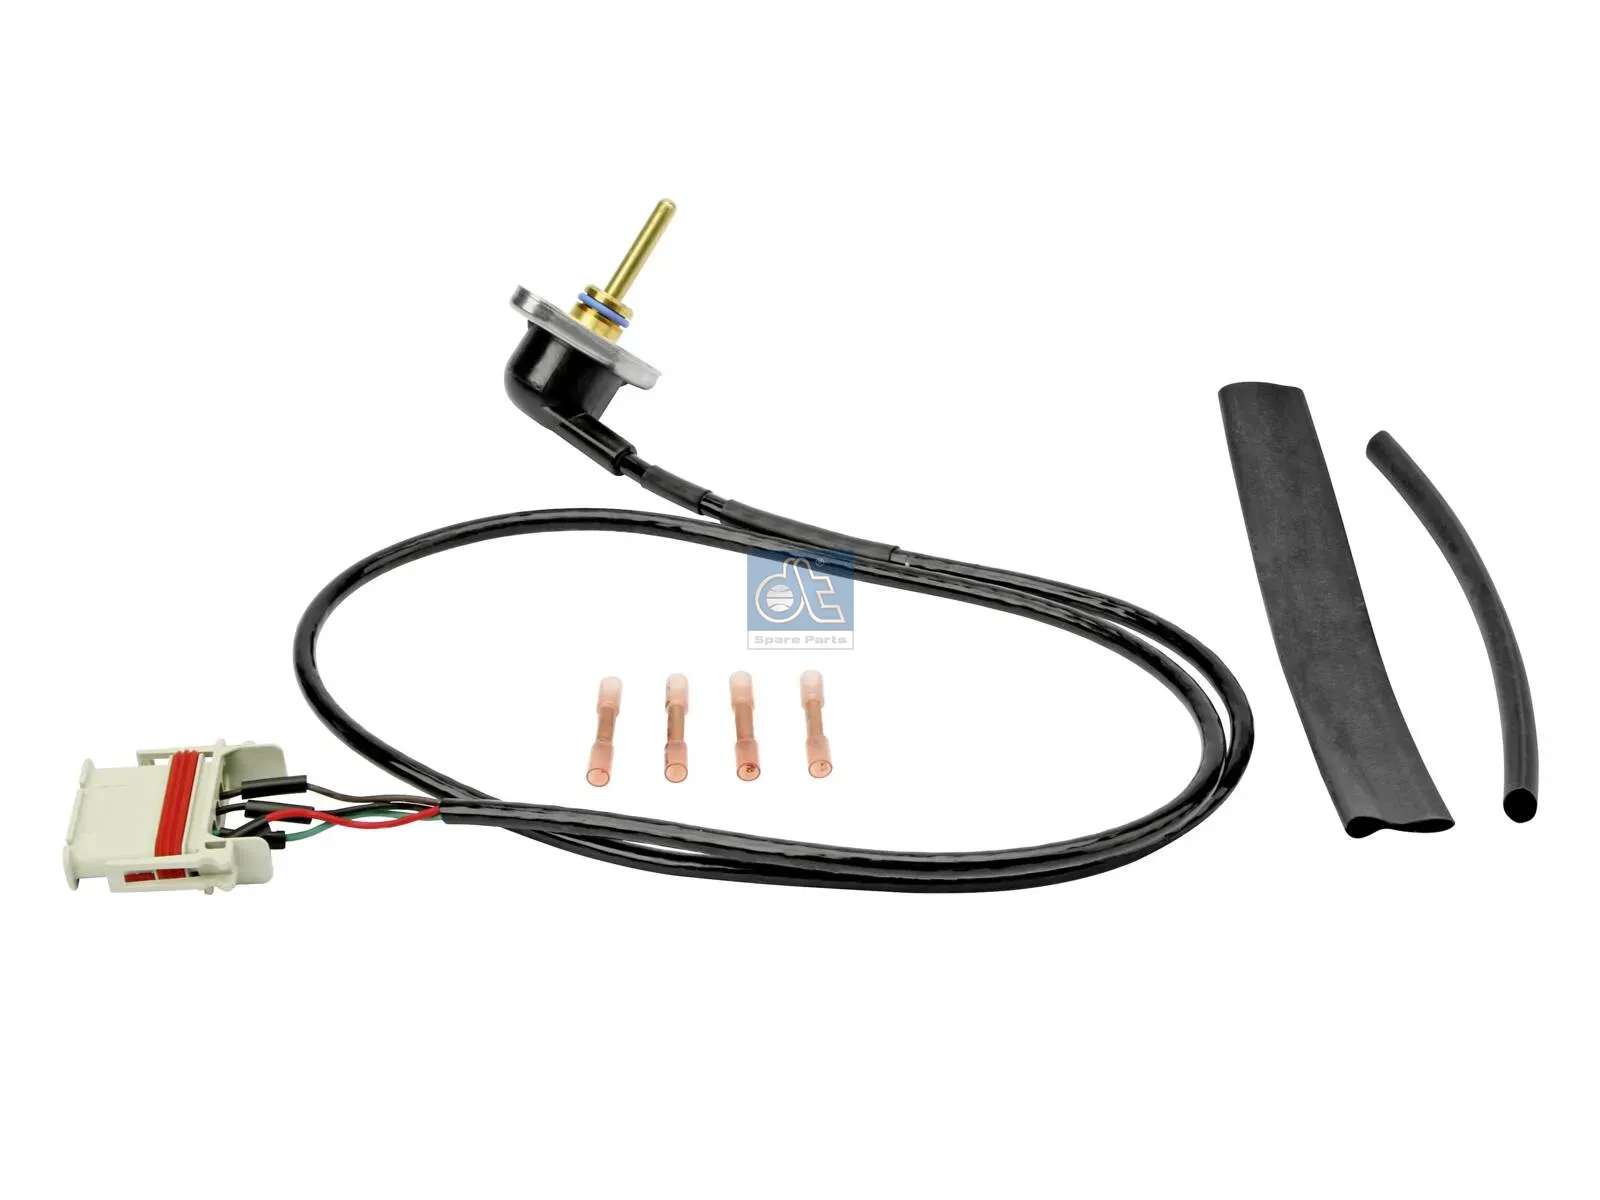 Charge pressure sensor, complete with mounting kit